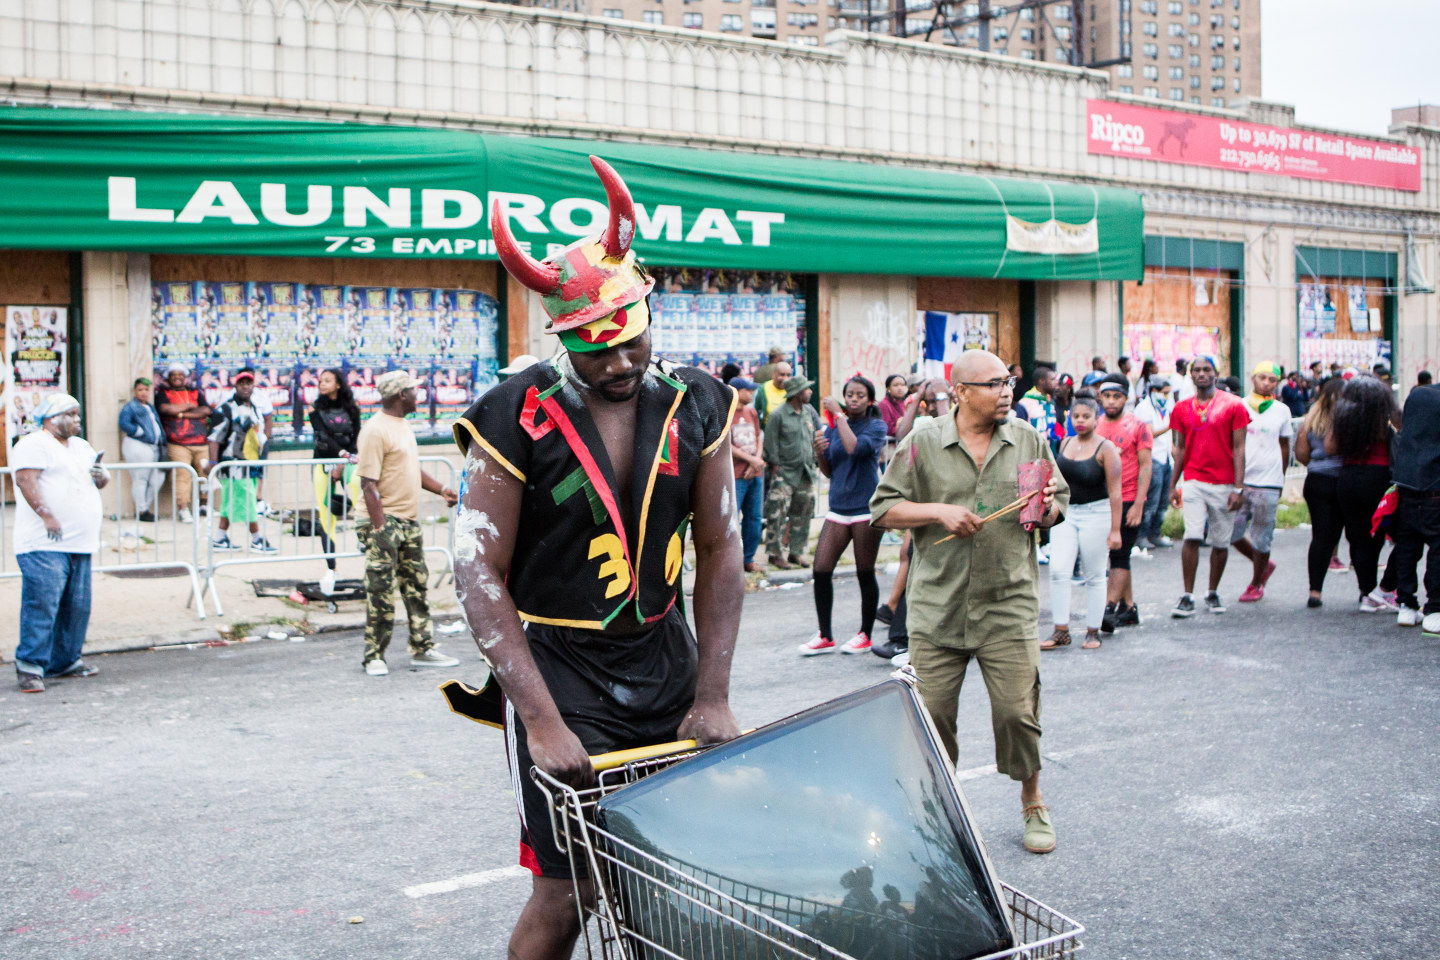 19 Photos That Capture The Joy Of The West Indian Day Parade